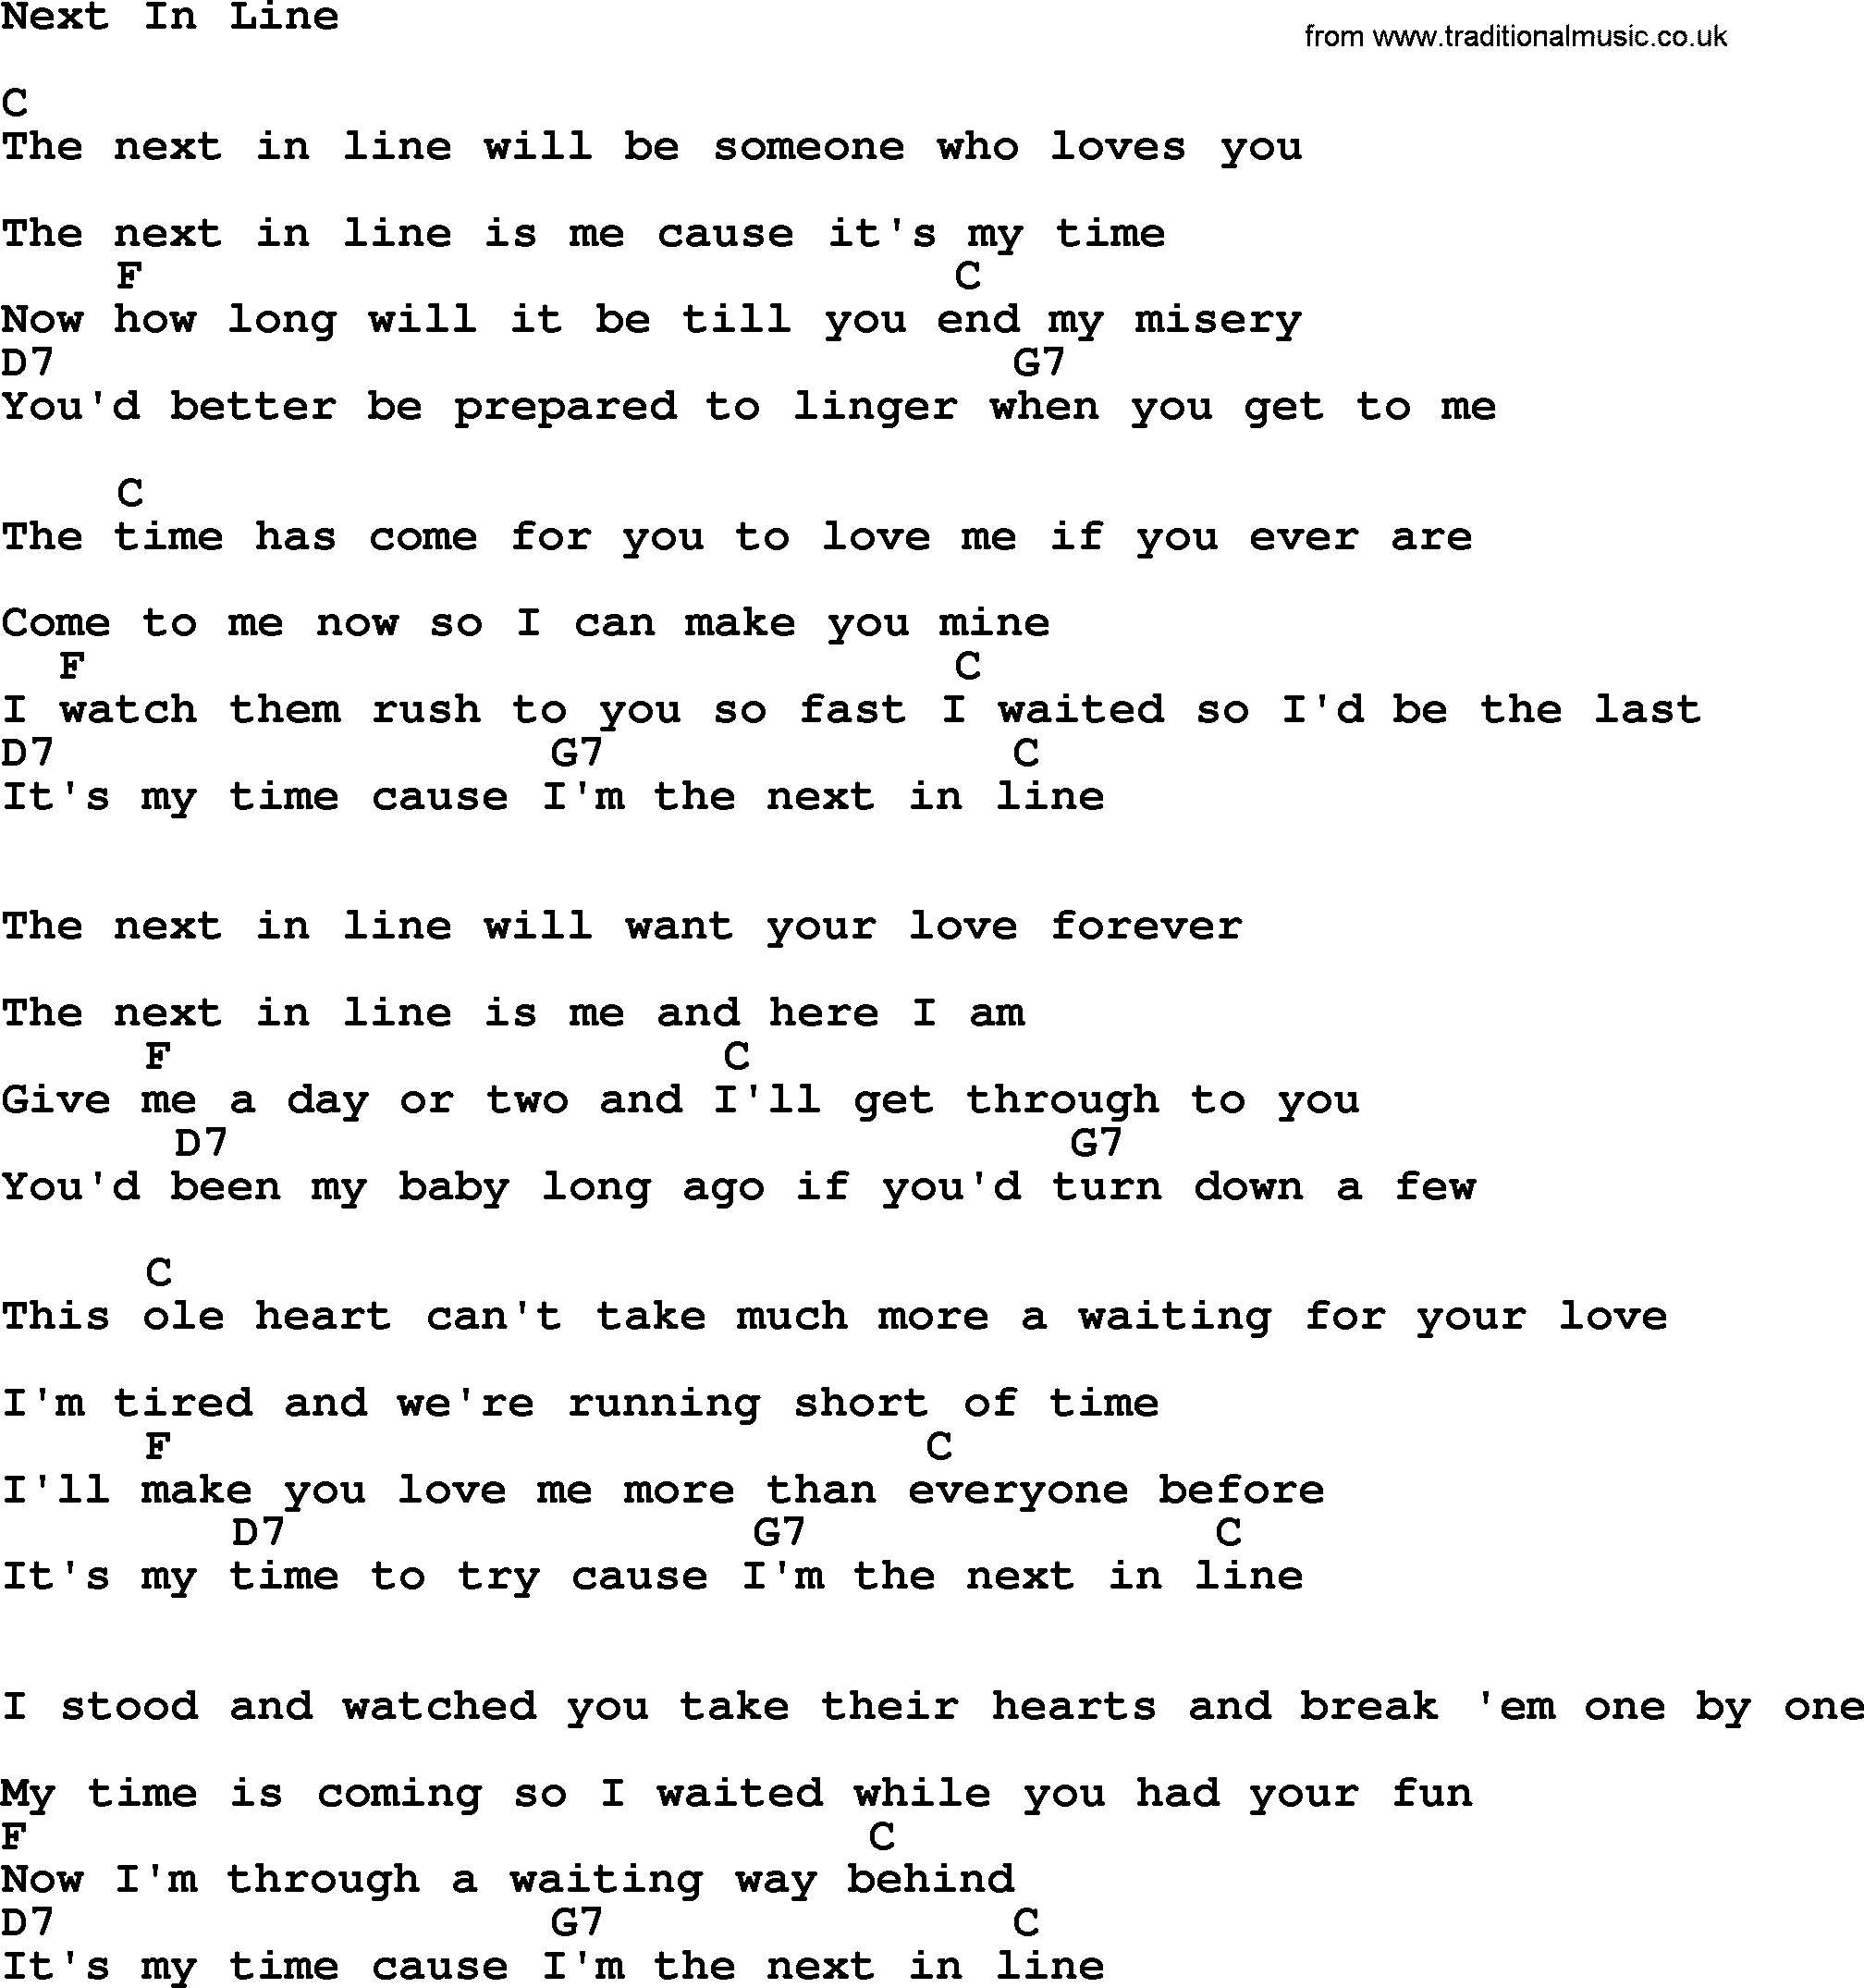 Johnny Cash song Next In Line, lyrics and chords